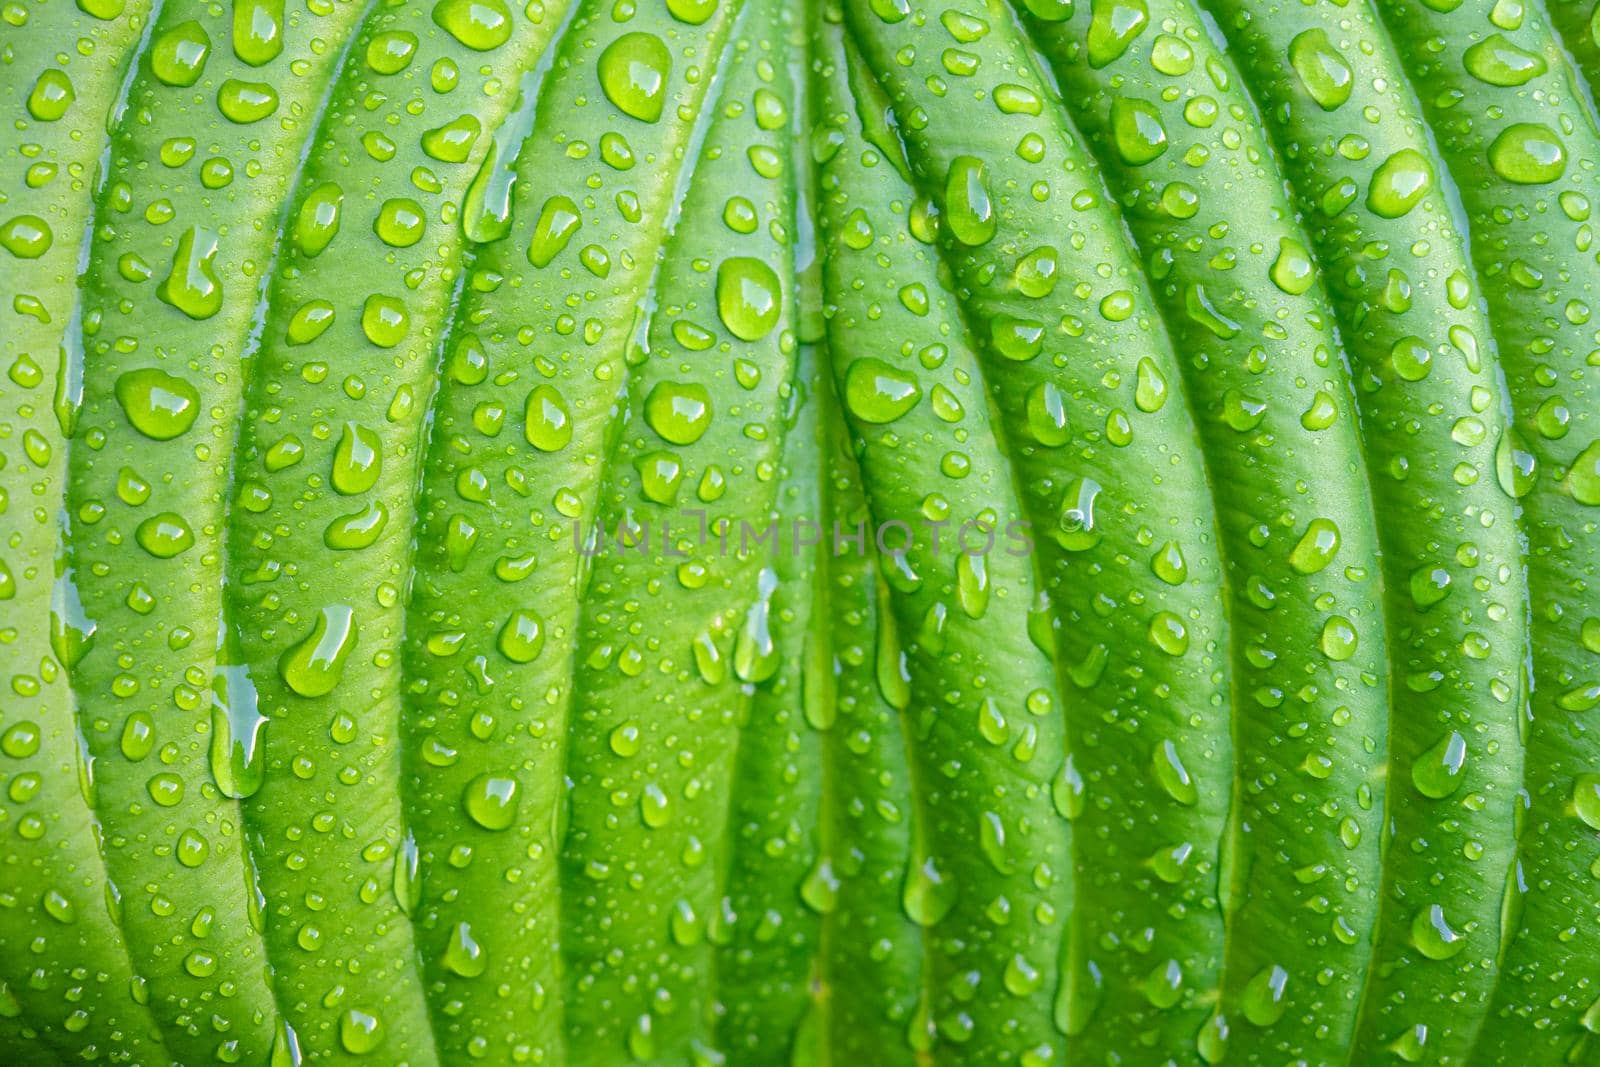 Green plant leaf with water drops after rain close-up by Serhii_Voroshchuk